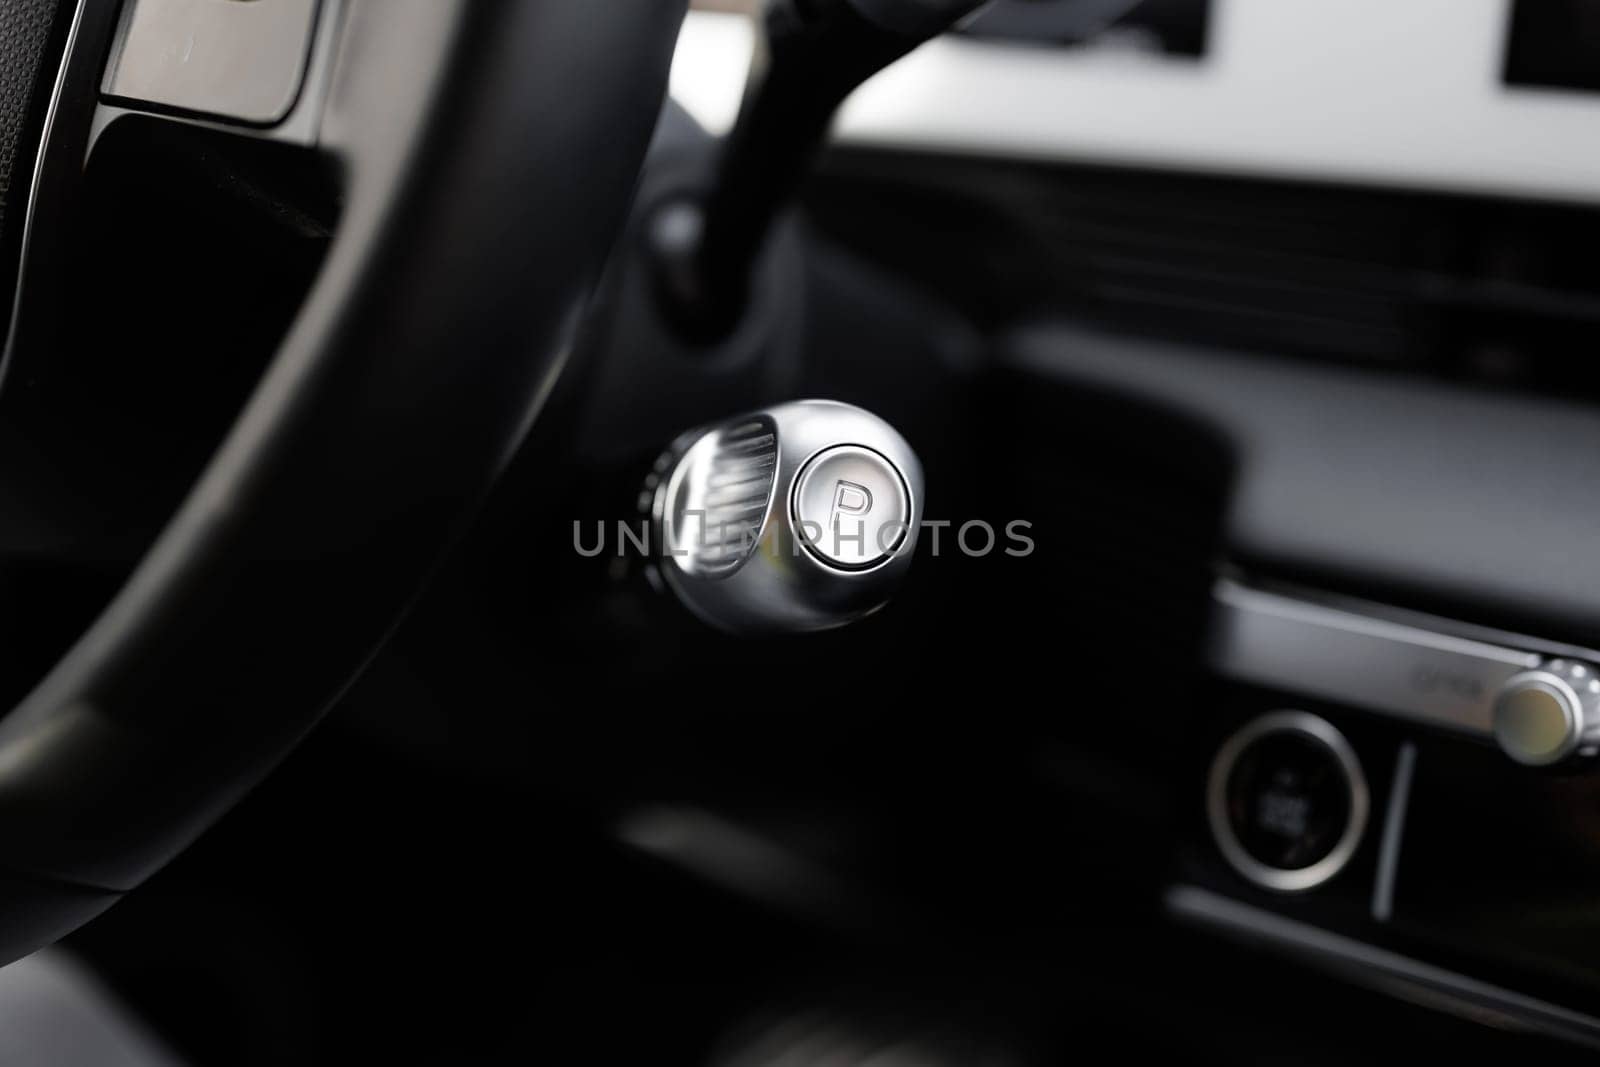 Handle of electric car gearbox control. Design details of minimalist concept of electric car - close-up details of automatic transmission and gear stick. Automatic gear lever and gear shift by uflypro